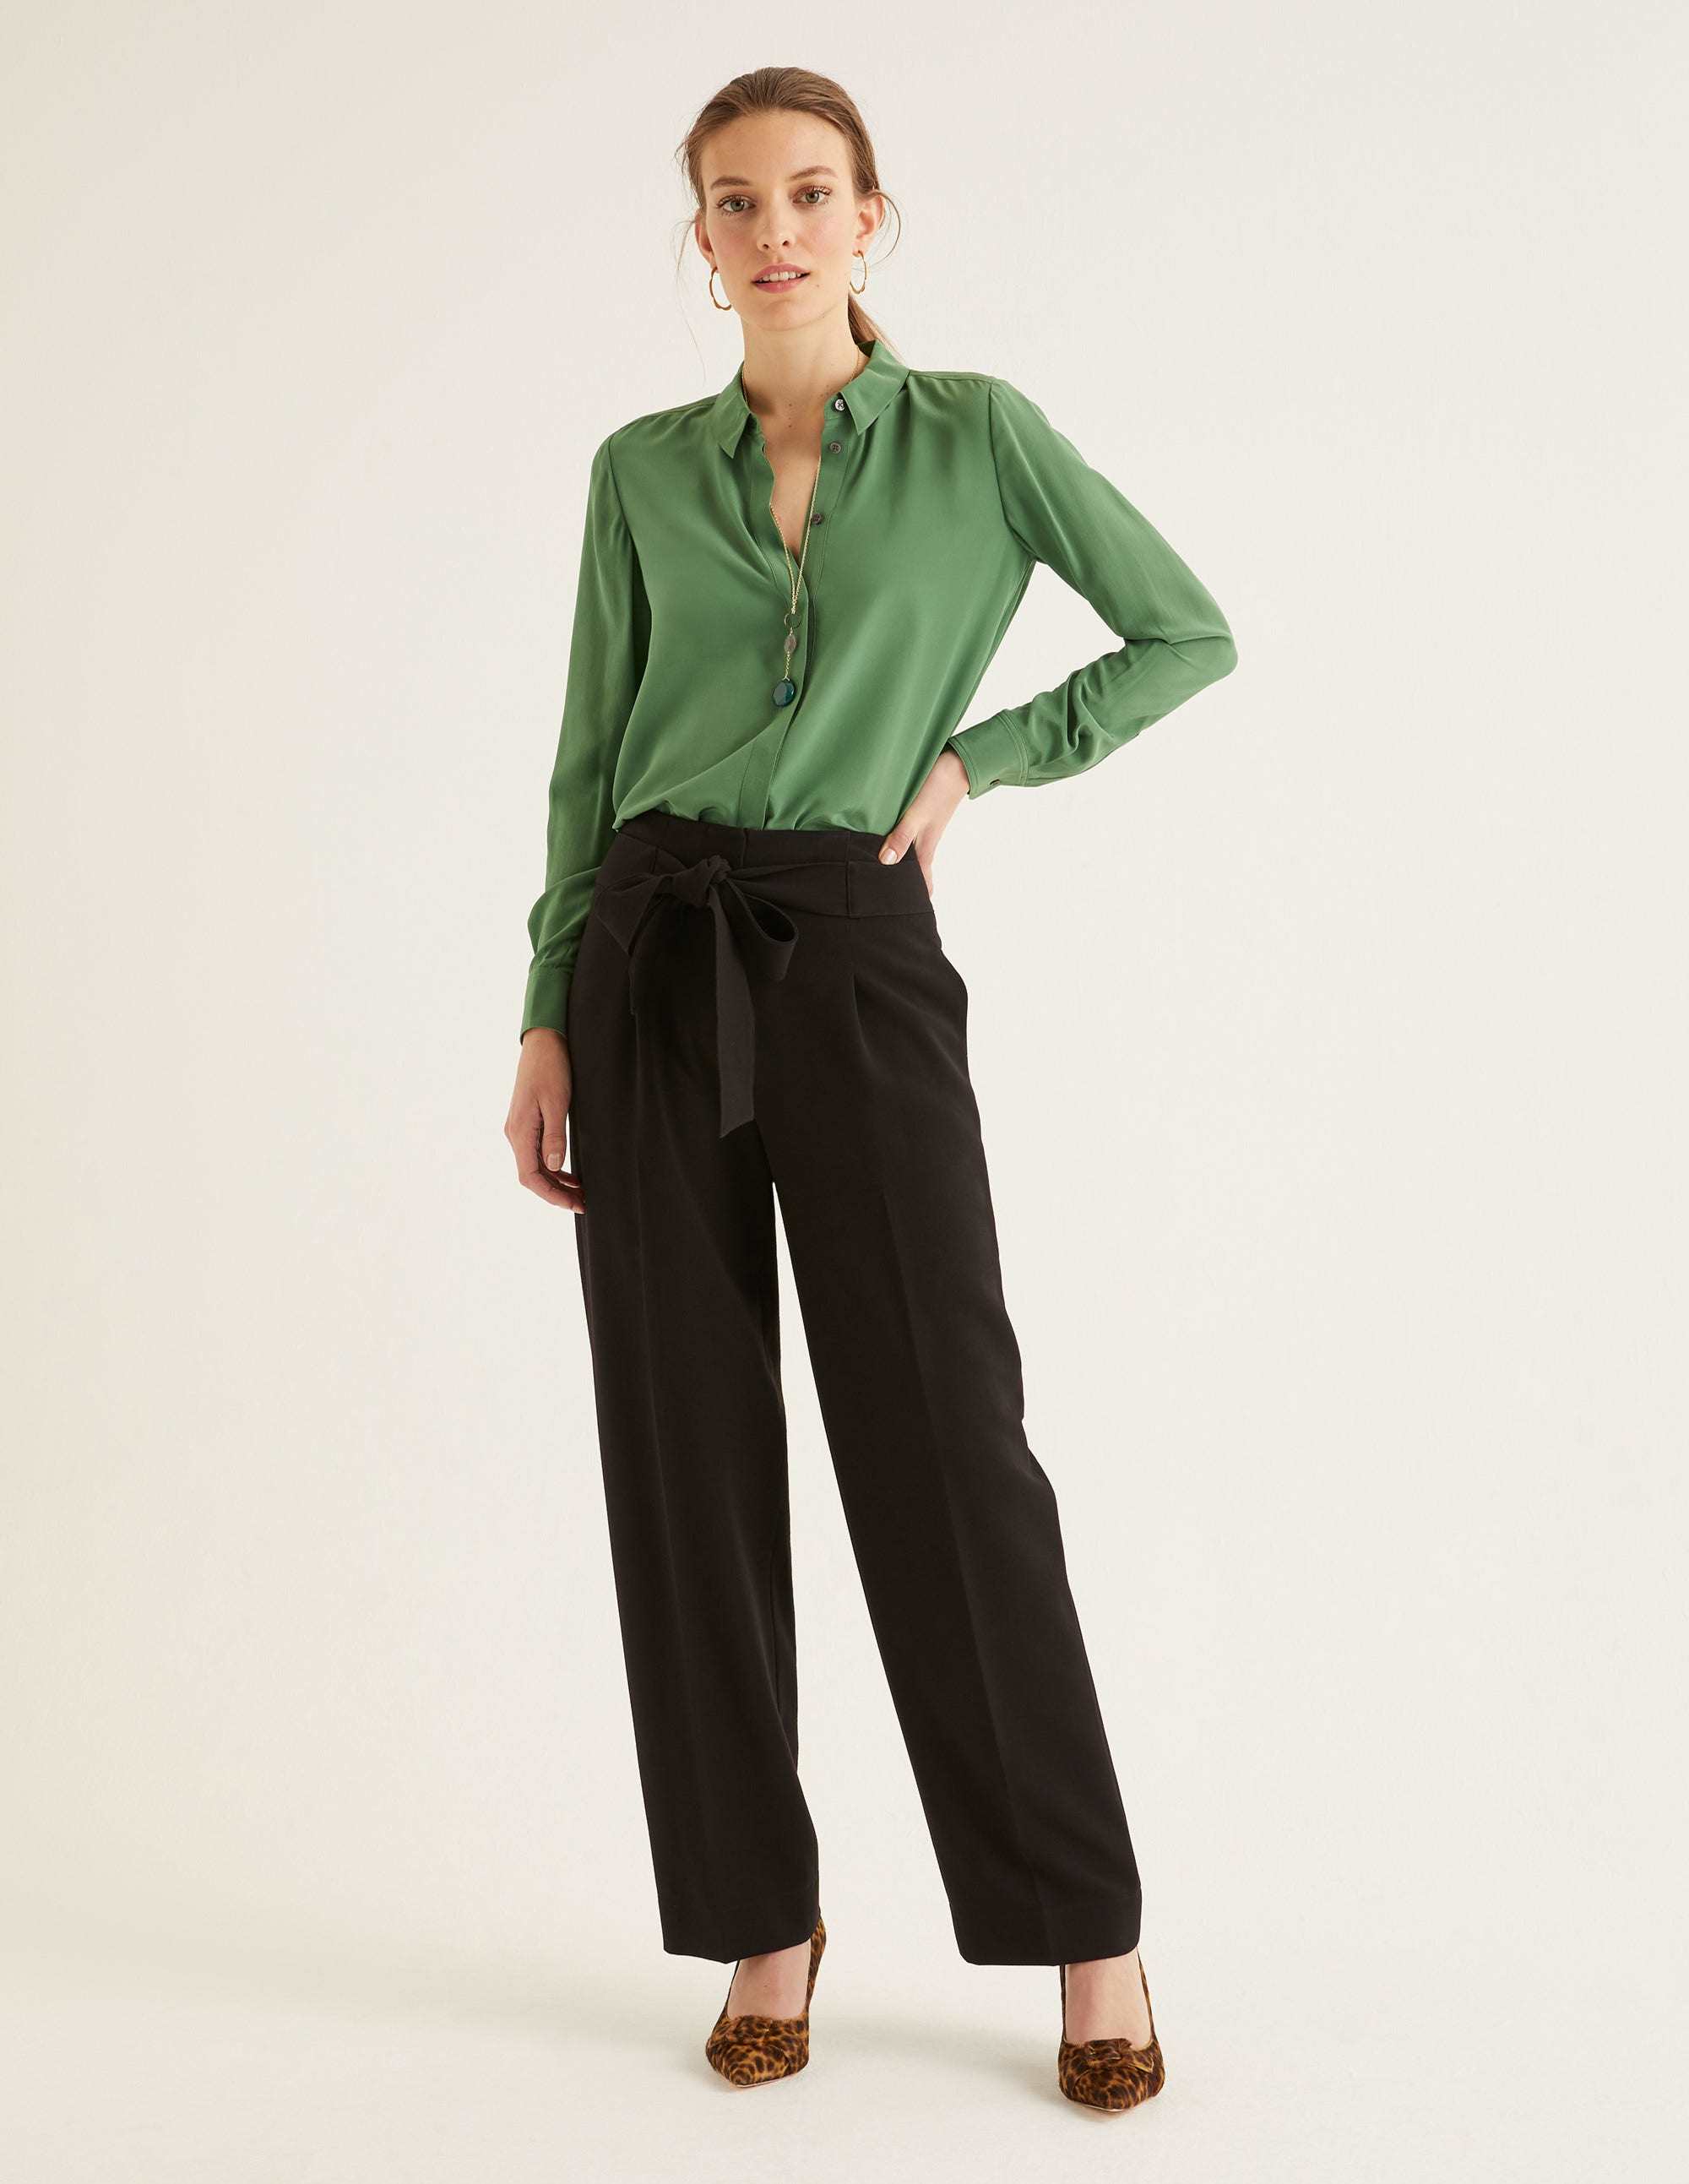 Armoire  Rent this Boden HighRise Wide Leg Trousers